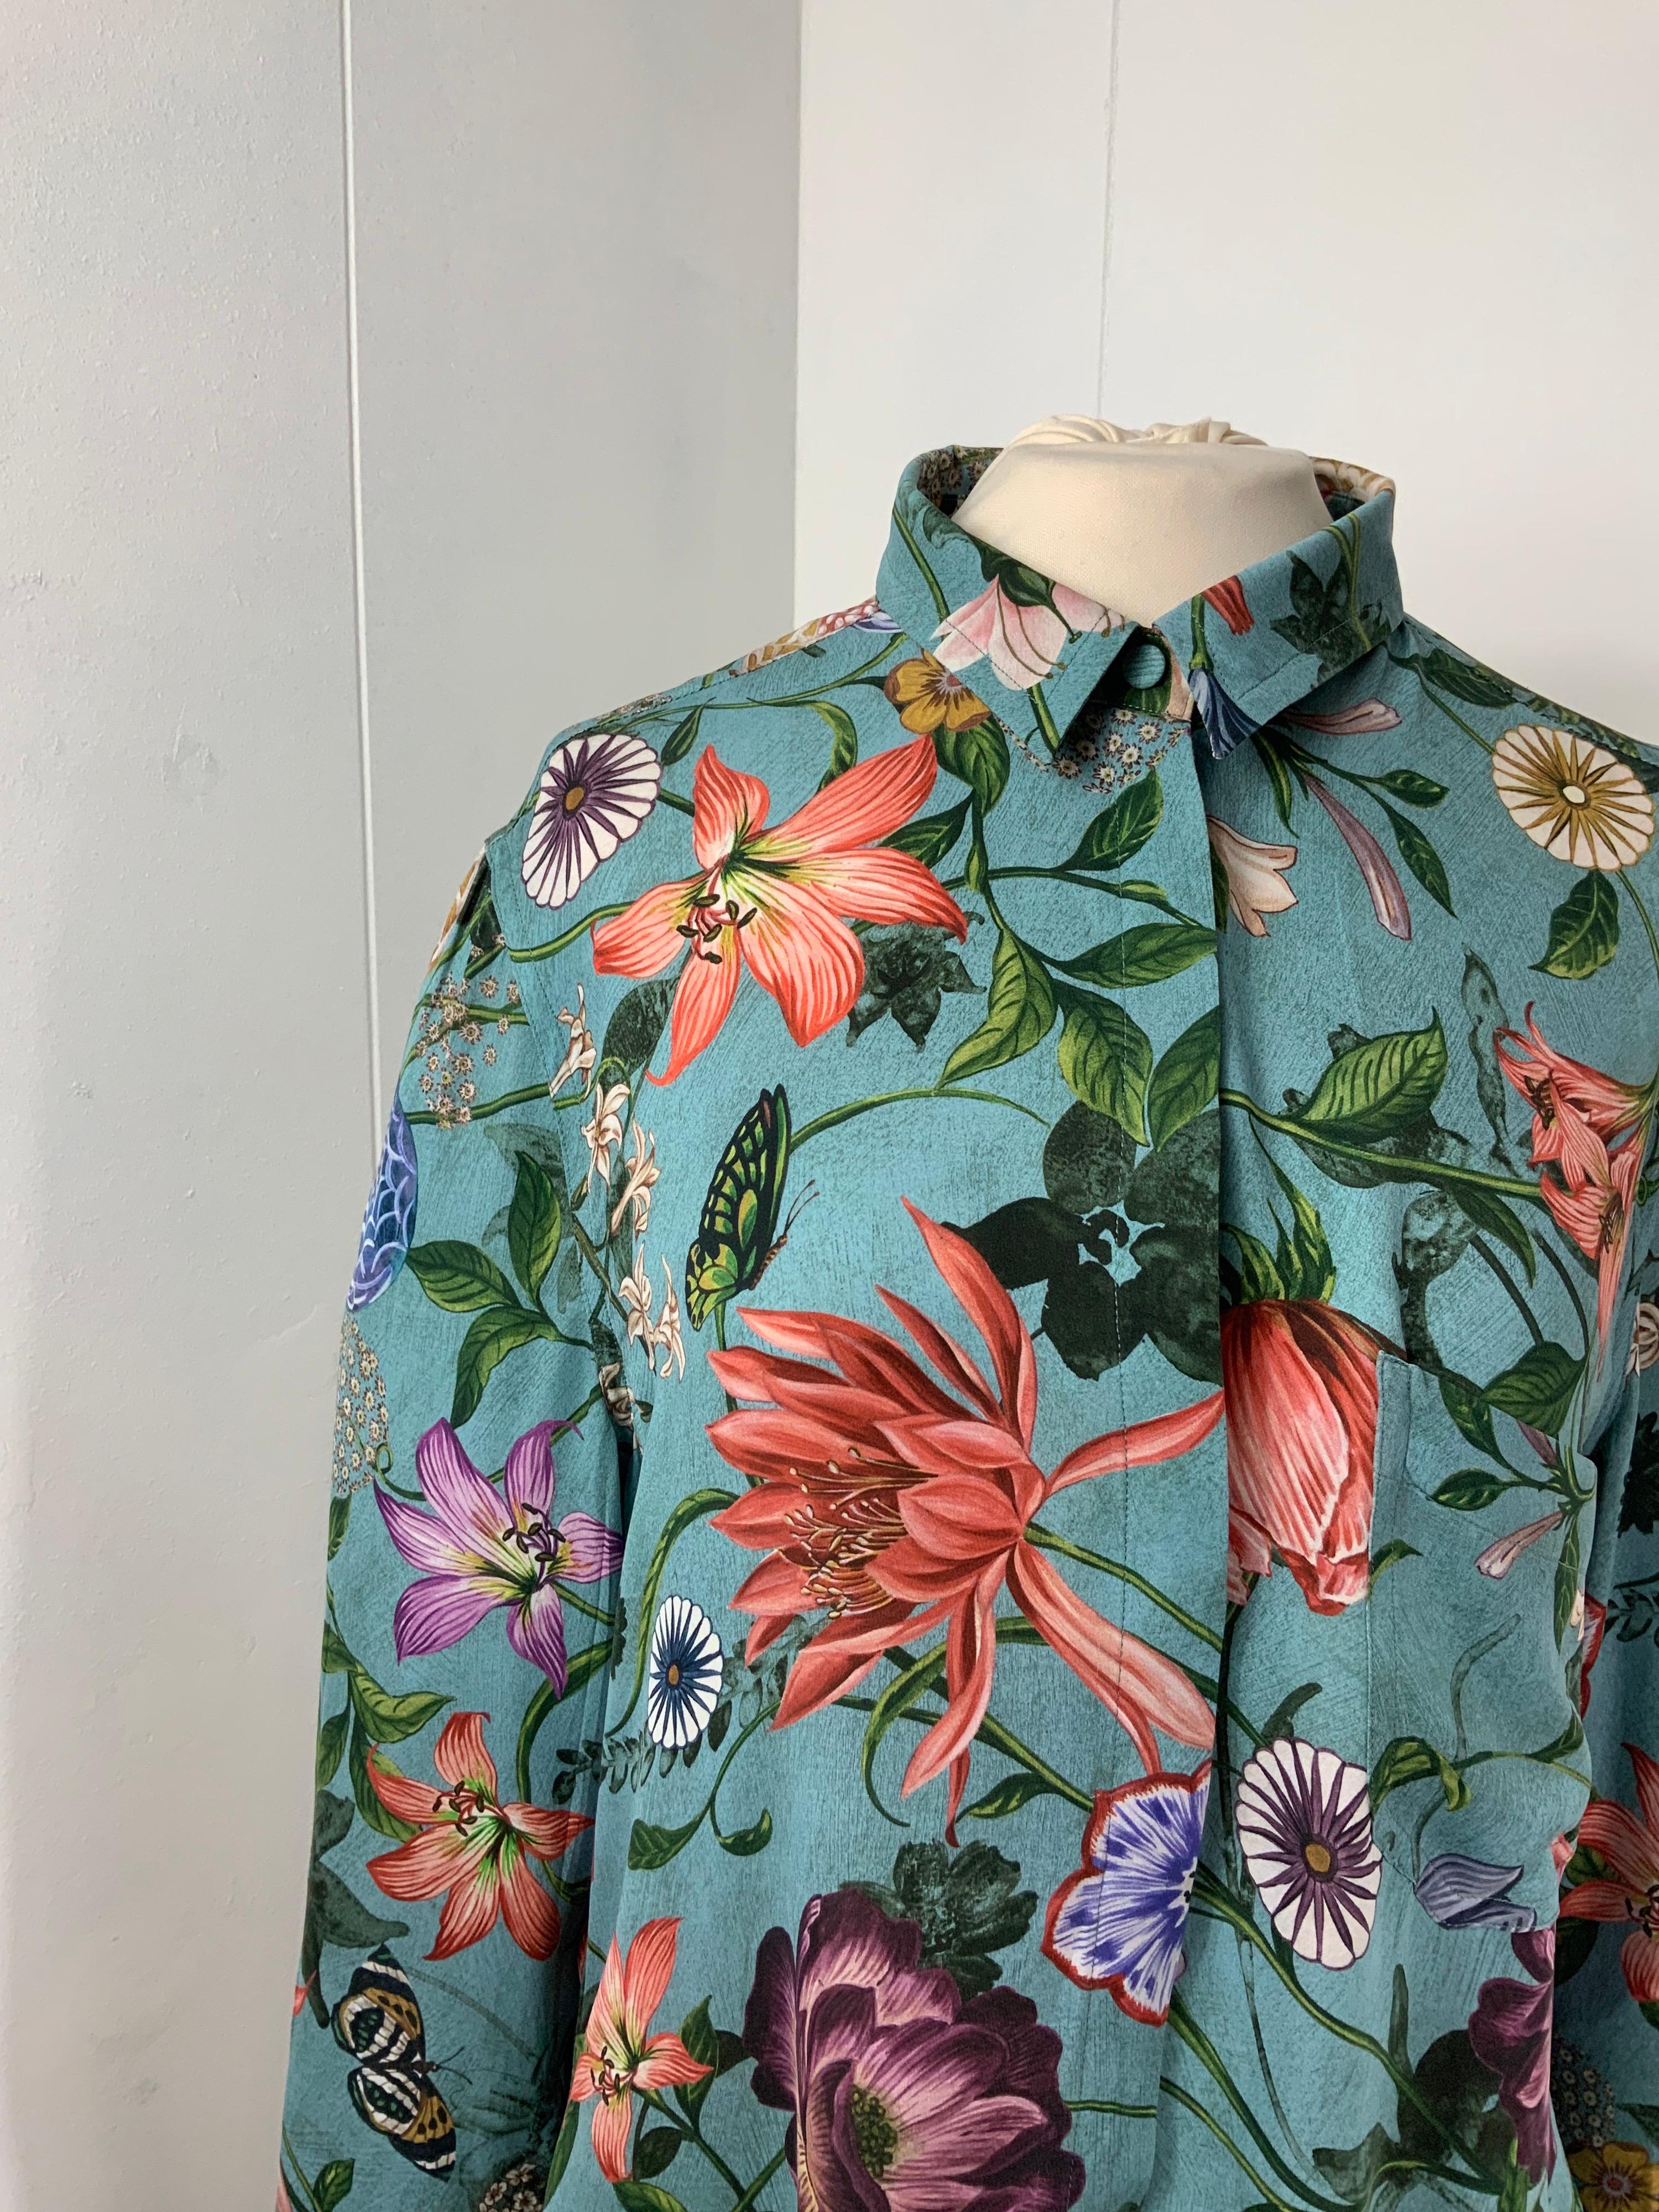 Gucci shirt 
Amazing Flora print.
100% silk.
Size 48 Italian 
Measurements 
Shoulders 46 cm
Bust 52 cm
Length 73 cm
Sleeves 60 cm
Conditions: Excellent - Previously owned, like new or lightly worn, with no signs of use and is in perfect condition.